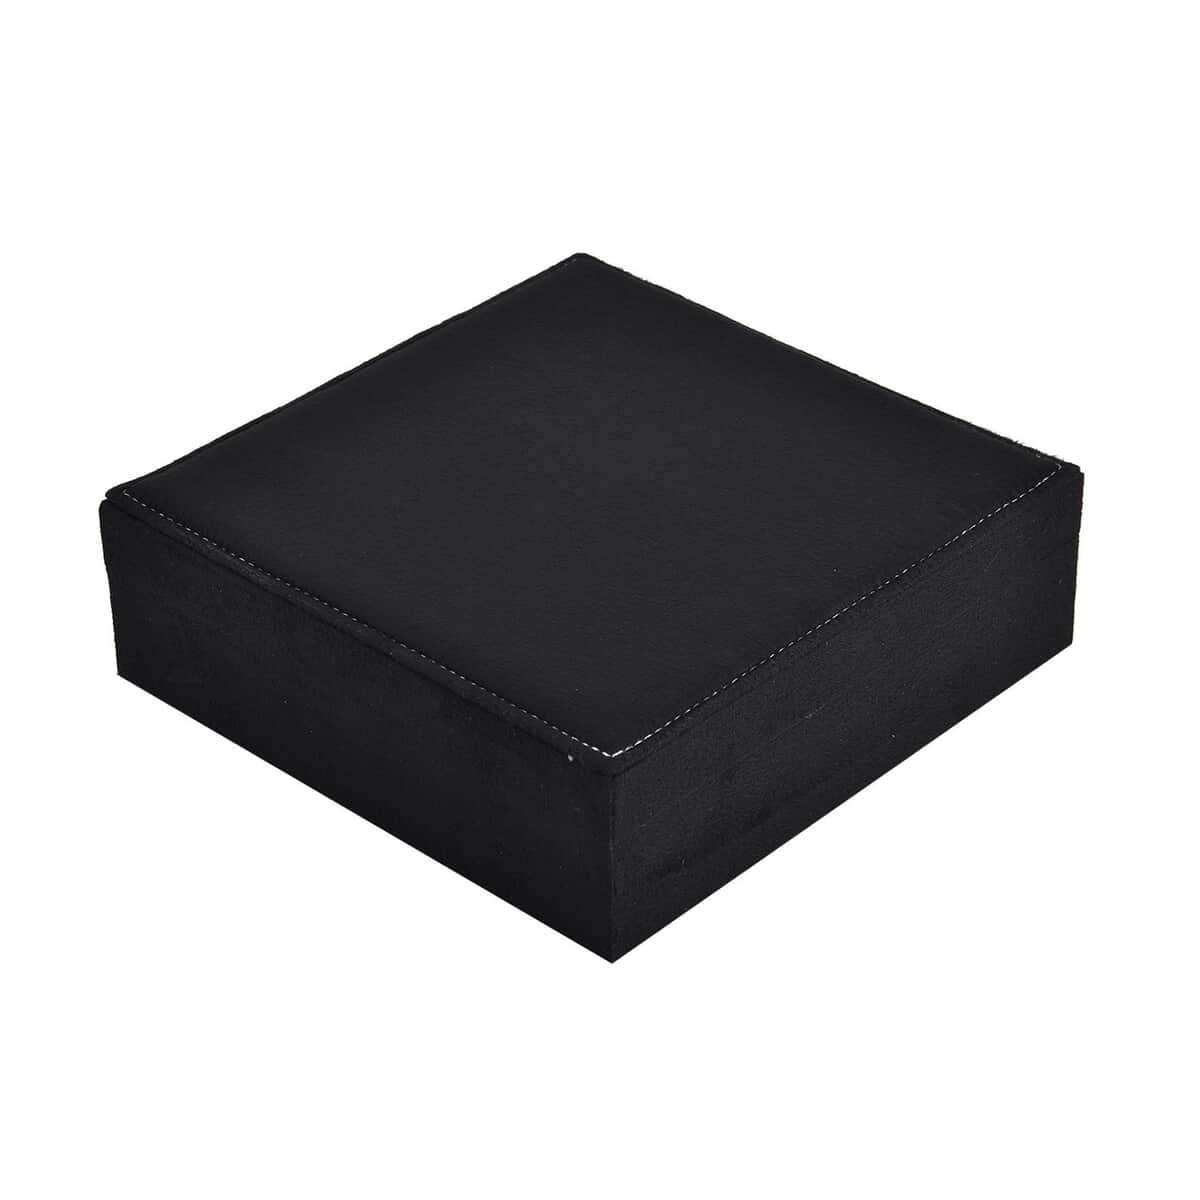 Black Velvet & MDF Jewelry Box with Latch Clasp 7.9"x7.9"x2.6") (11 Ring Slot, 6 Hooks for Necklace, Pocket) image number 2